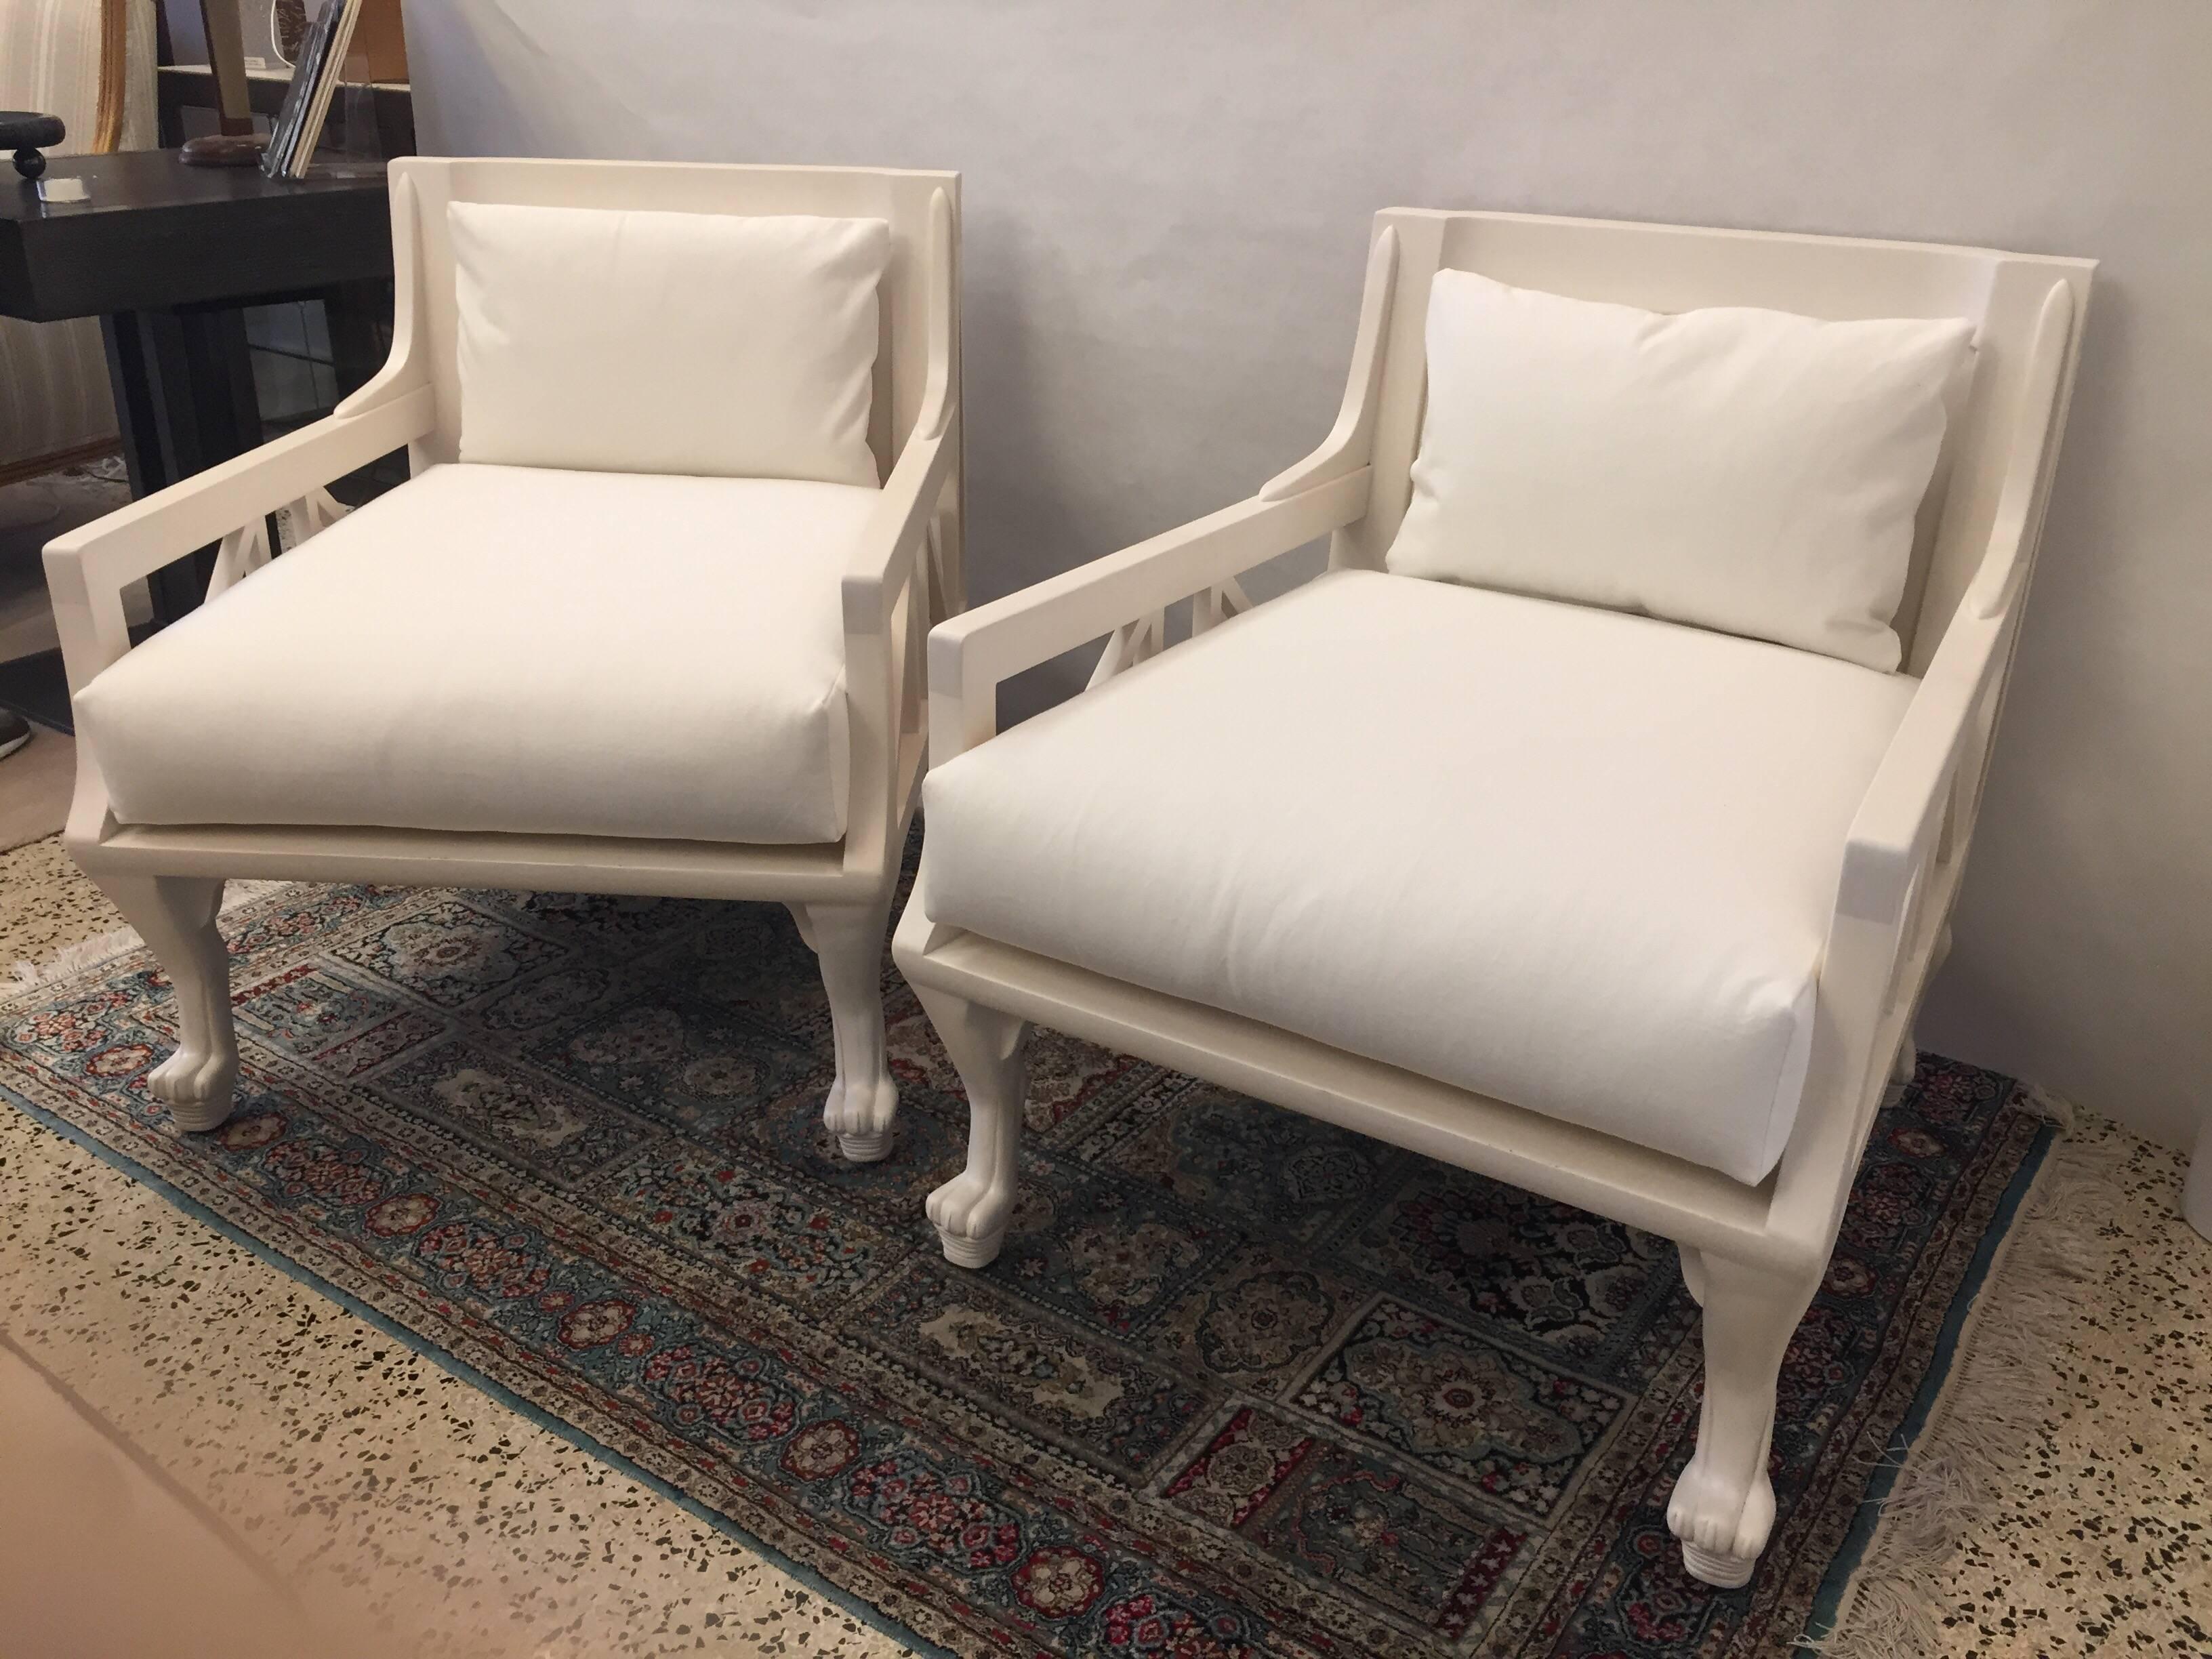 This is a phenomenal and rare pair of John Hutton chairs, beautifully refinished and reupholstered.

Designer John Hutton was a San Francisco designer, Who virtually created a genre of modern furniture. He came into his own after he became the